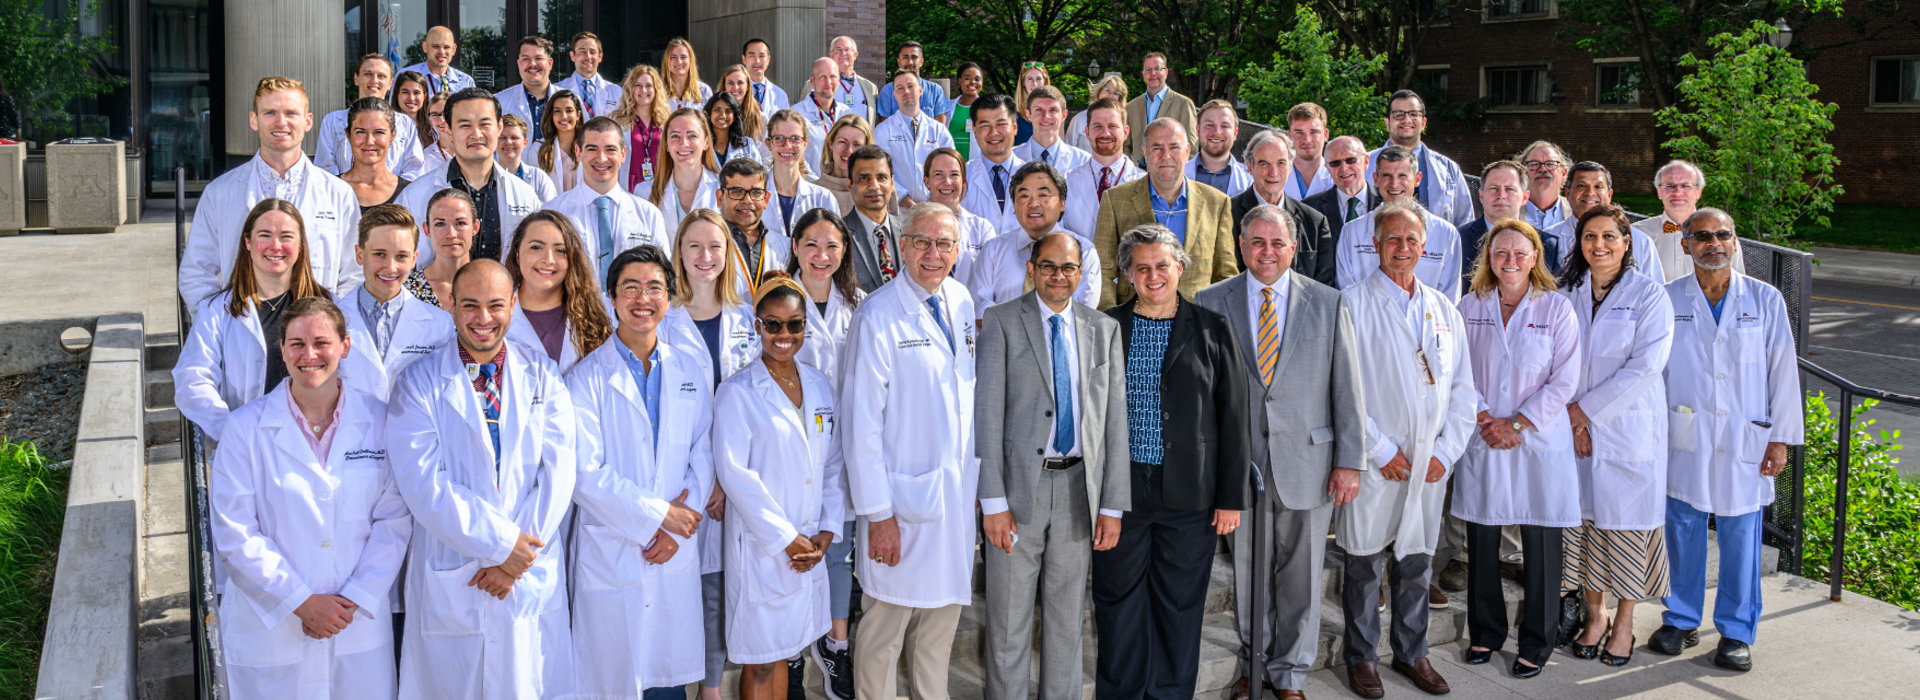 Surgery 2022 Faculty and Trainee Group Photo